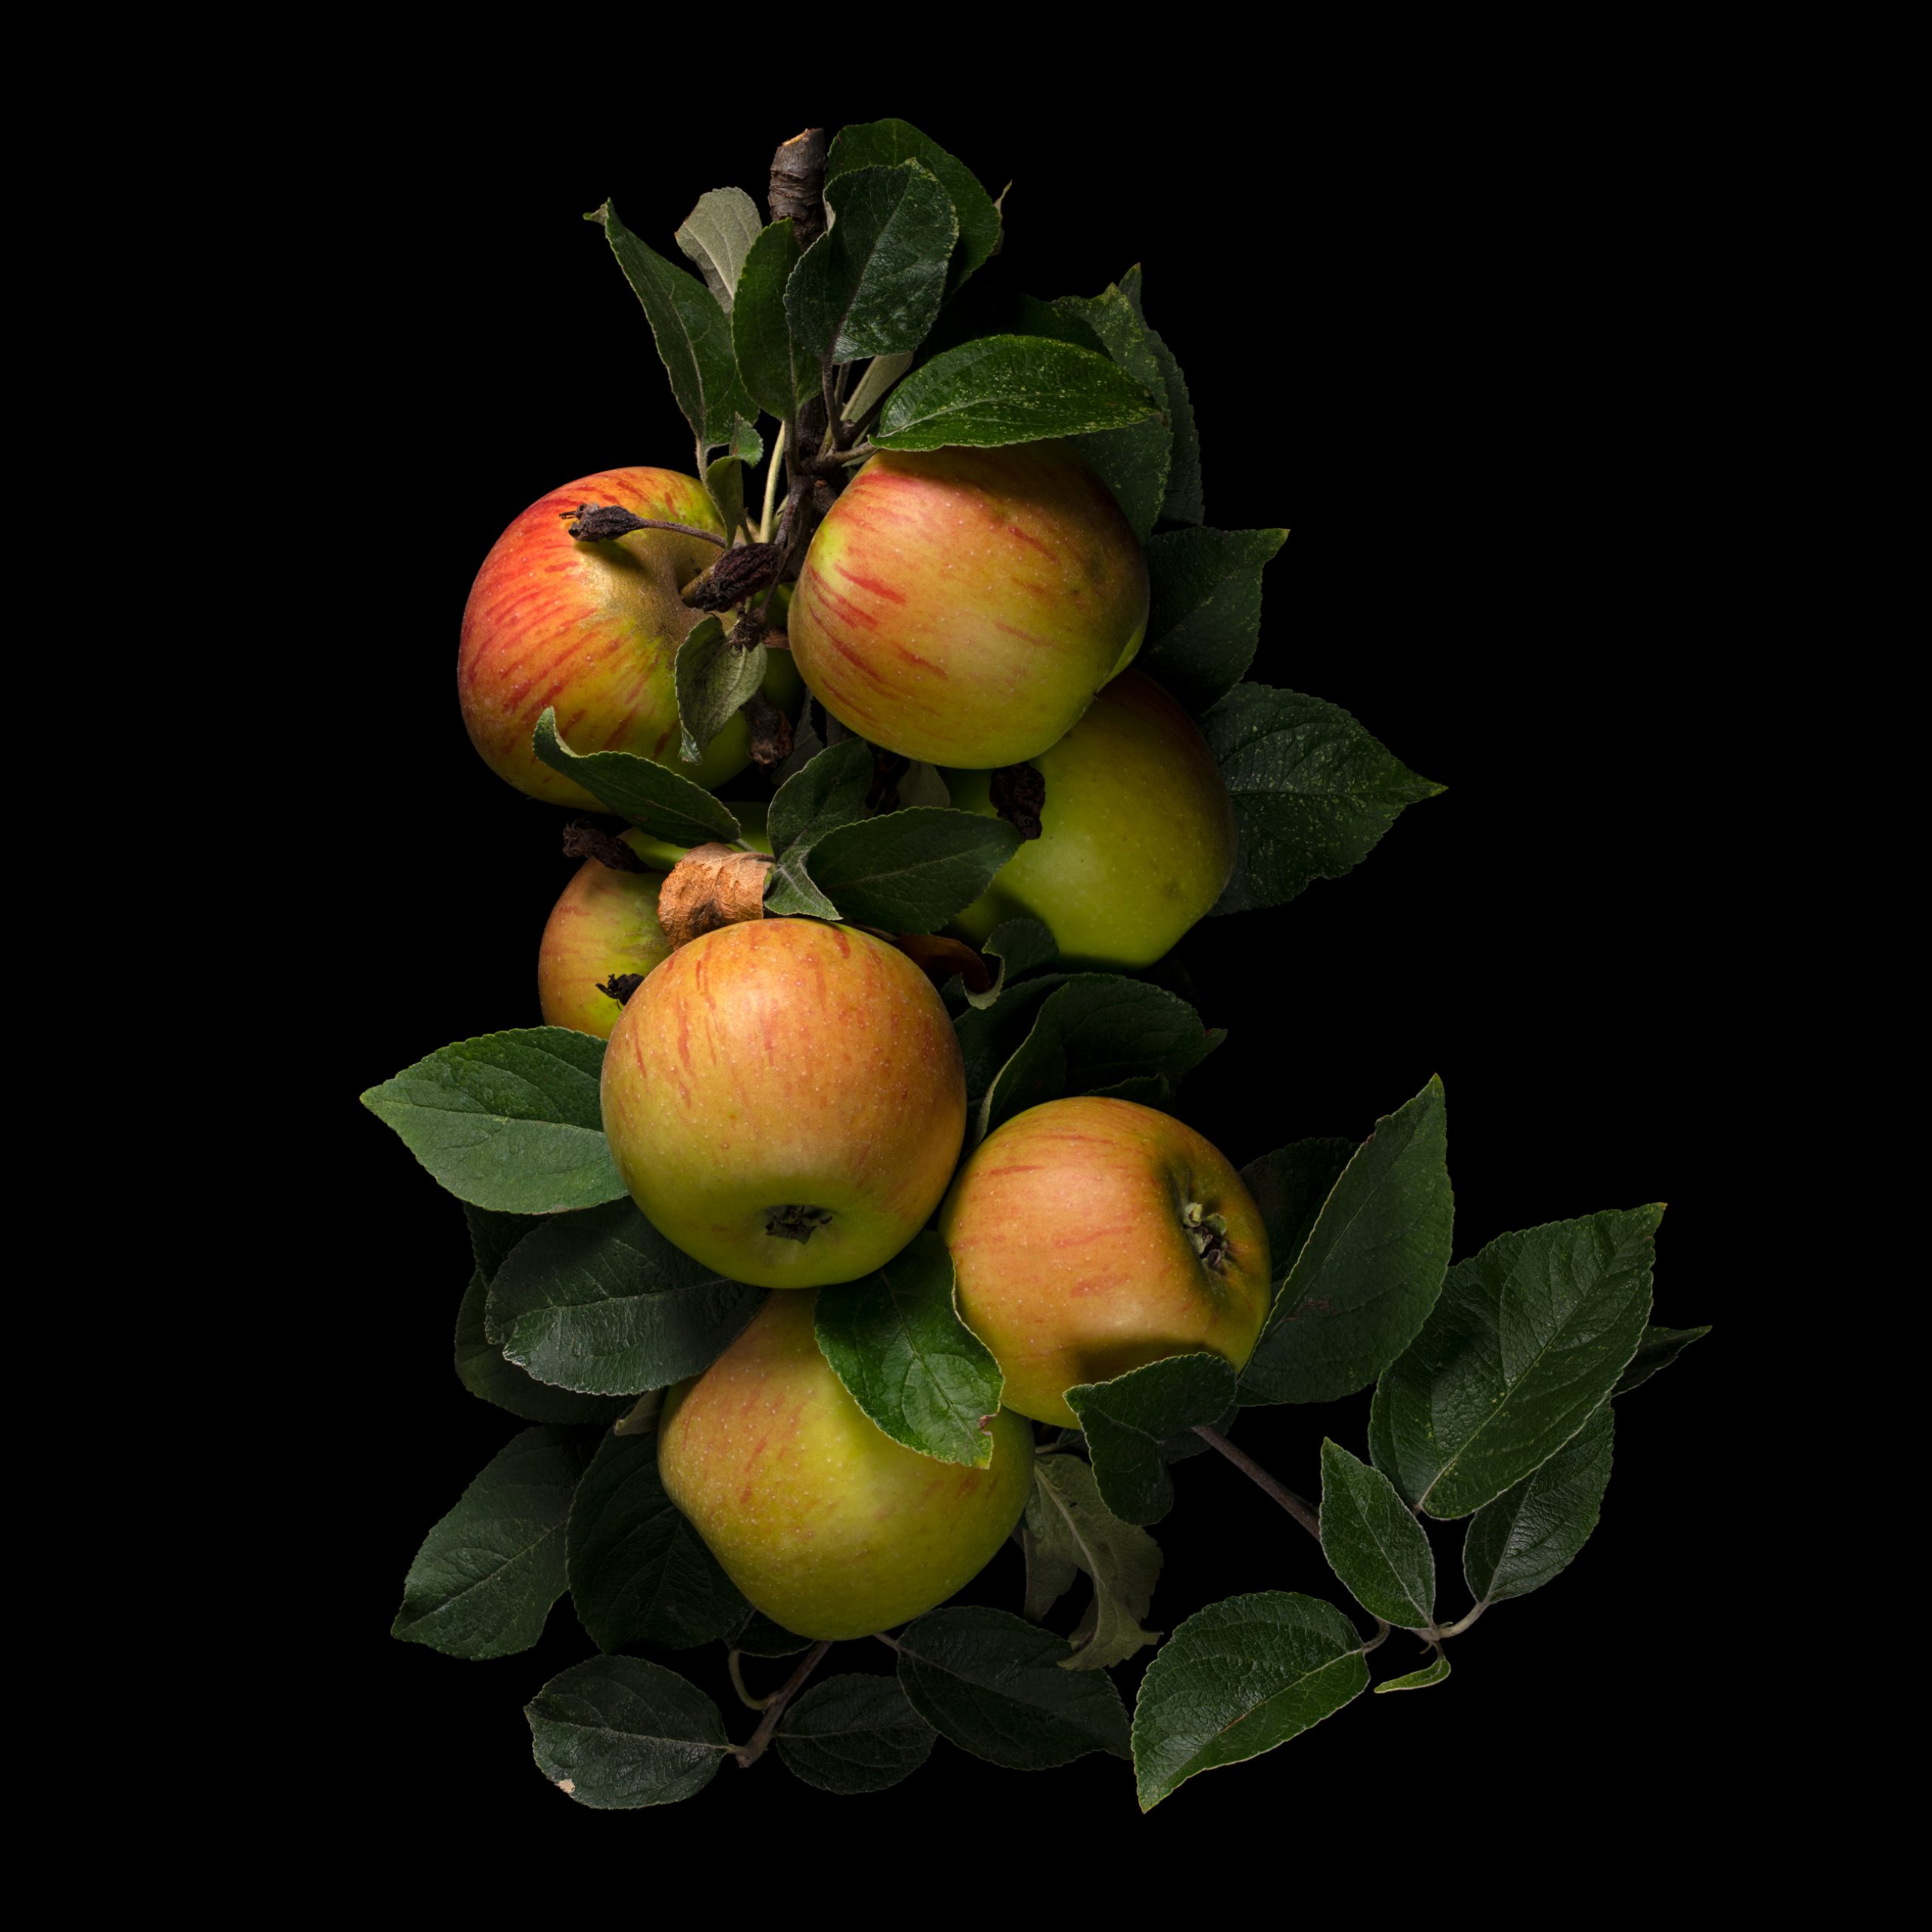 King of the Pippins (apple cultivar): Malus domestica ‘King of the Pippins’